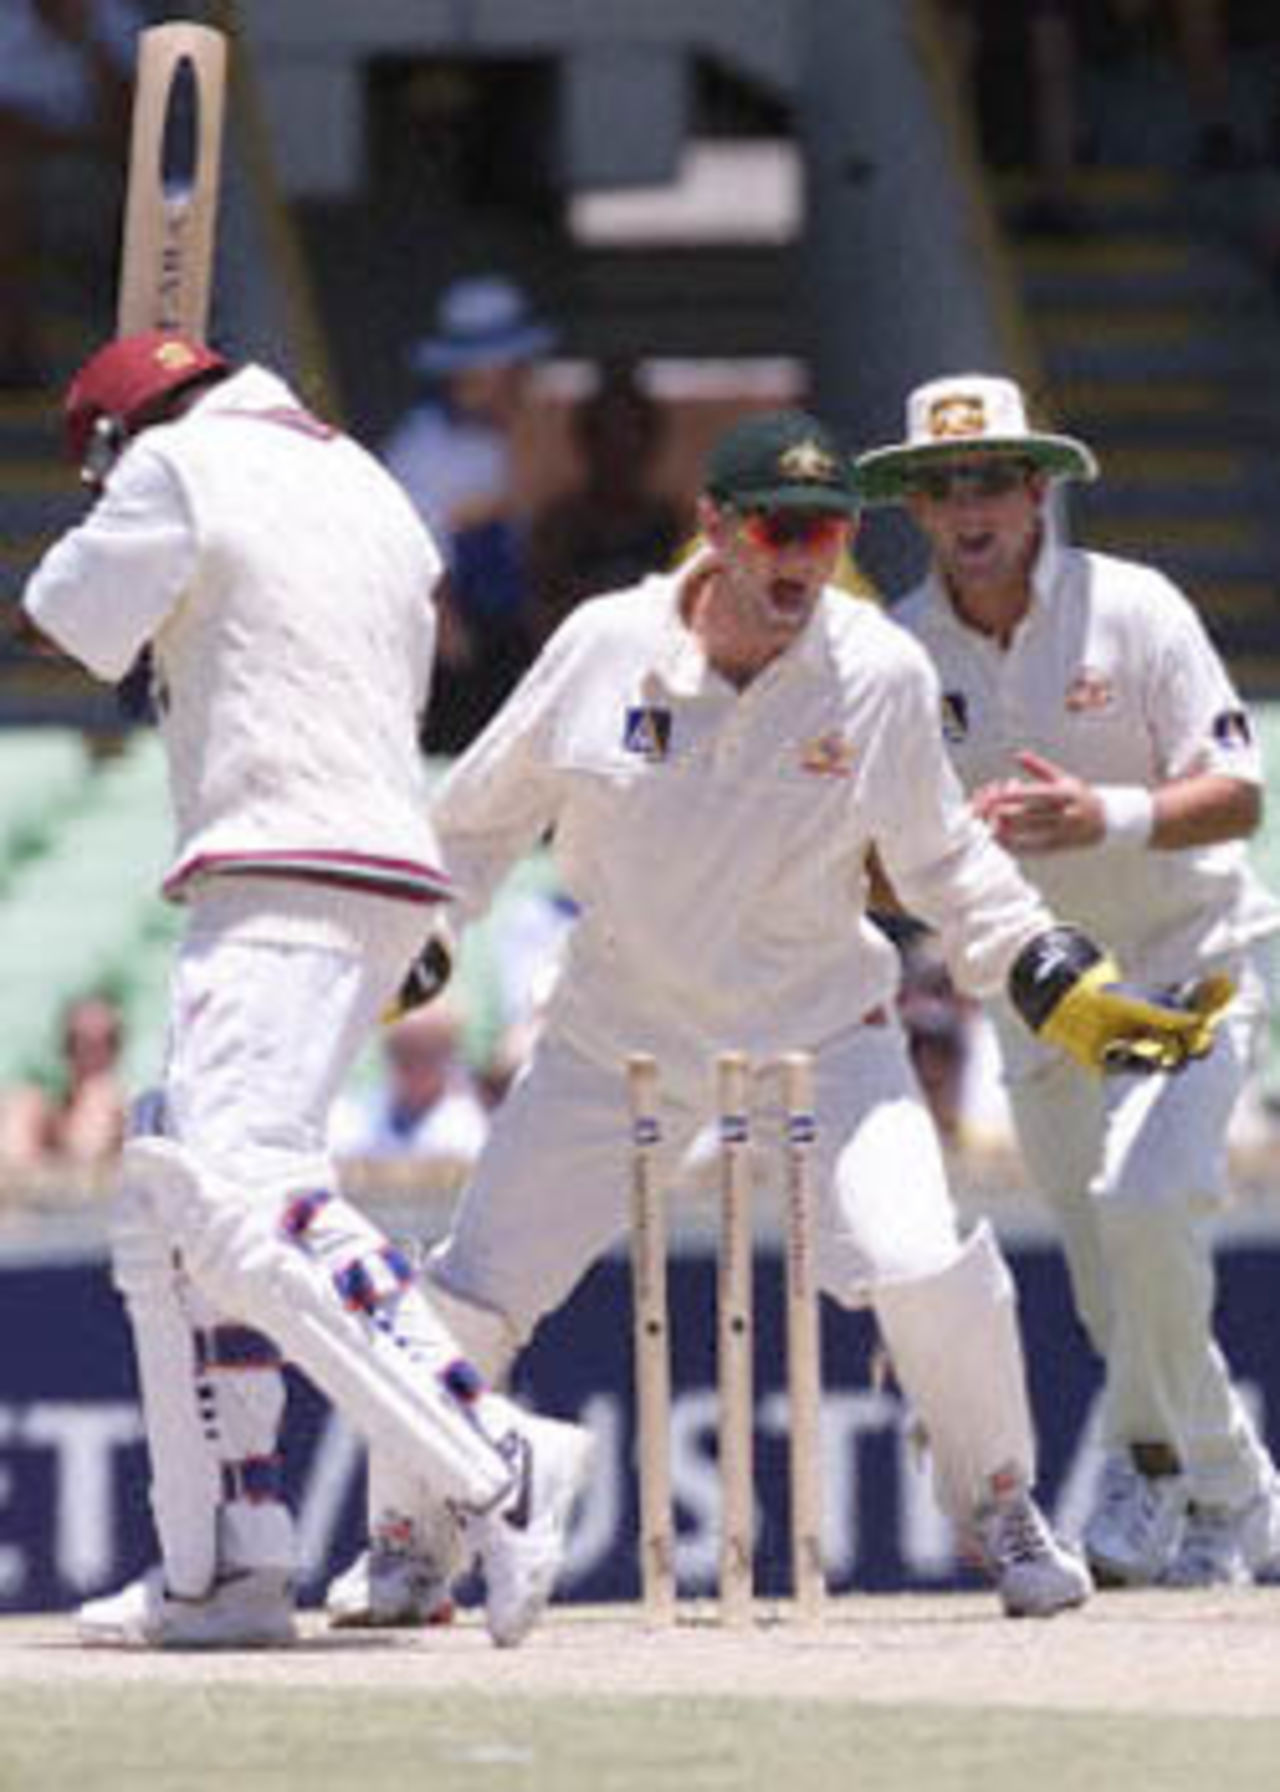 Adam Gilchrist's joy knows no bounds as Brian Lara is bowled by Stuart MacGill for 17, The Frank Worrell Trophy, 2000/01, 2nd Test, Australia v West Indies, W.A.C.A. Ground, Perth, 01-05 December 2000 (Day 3).